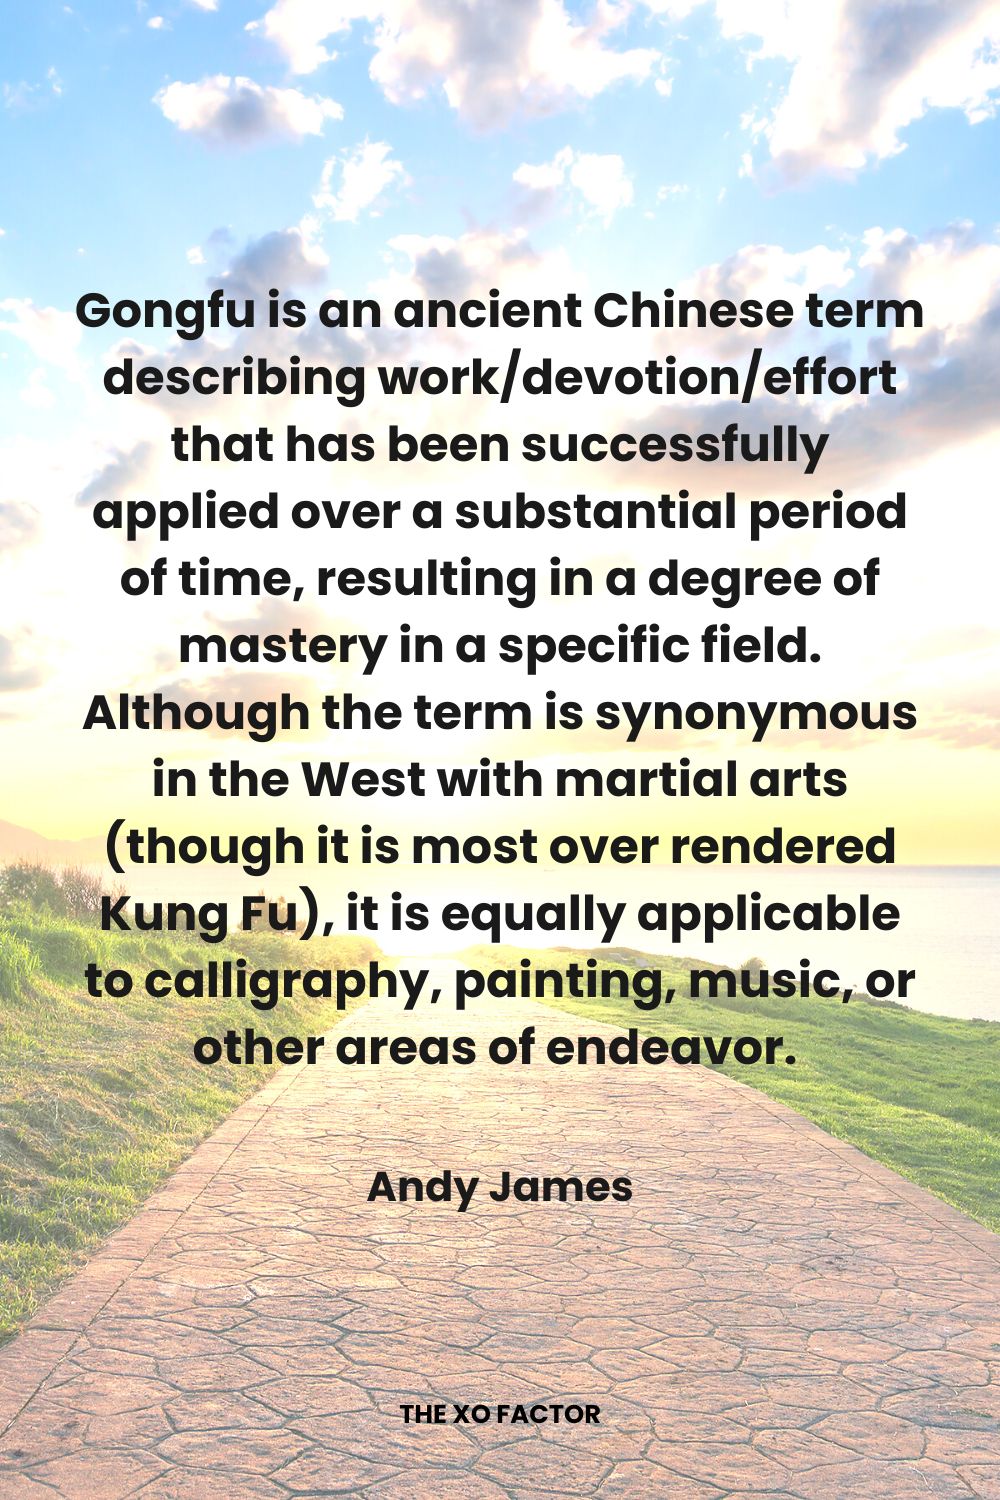 Gongfu is an ancient Chinese term describing work/devotion/effort that has been successfully applied over a substantial period of time, resulting in a degree of mastery in a specific field.  Although the term is synonymous in the West with martial arts (though it is most over rendered Kung Fu), it is equally applicable to calligraphy, painting, music, or other areas of endeavor. Andy James